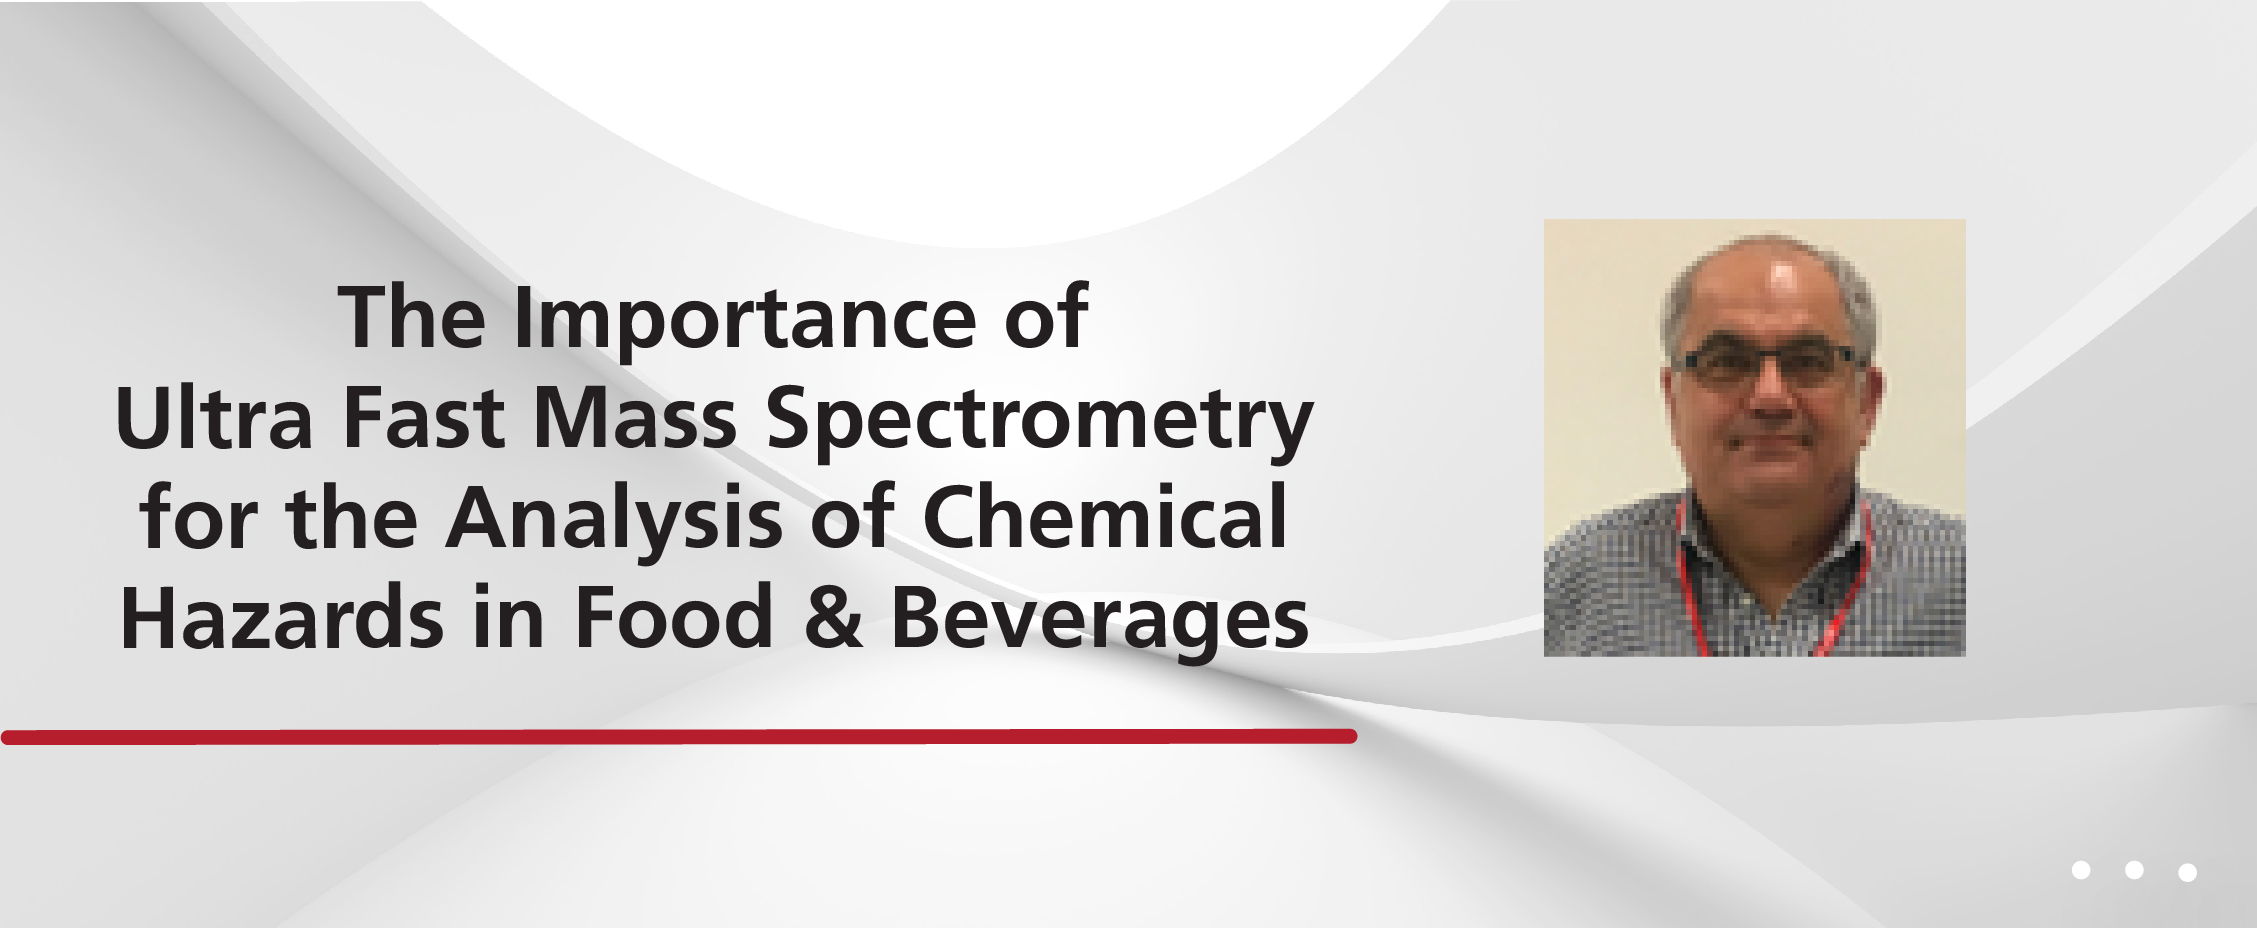 The Importance of Ultra Fast Mass Spectrometry for the Analysis of Chemical Hazards in Food & Beverages